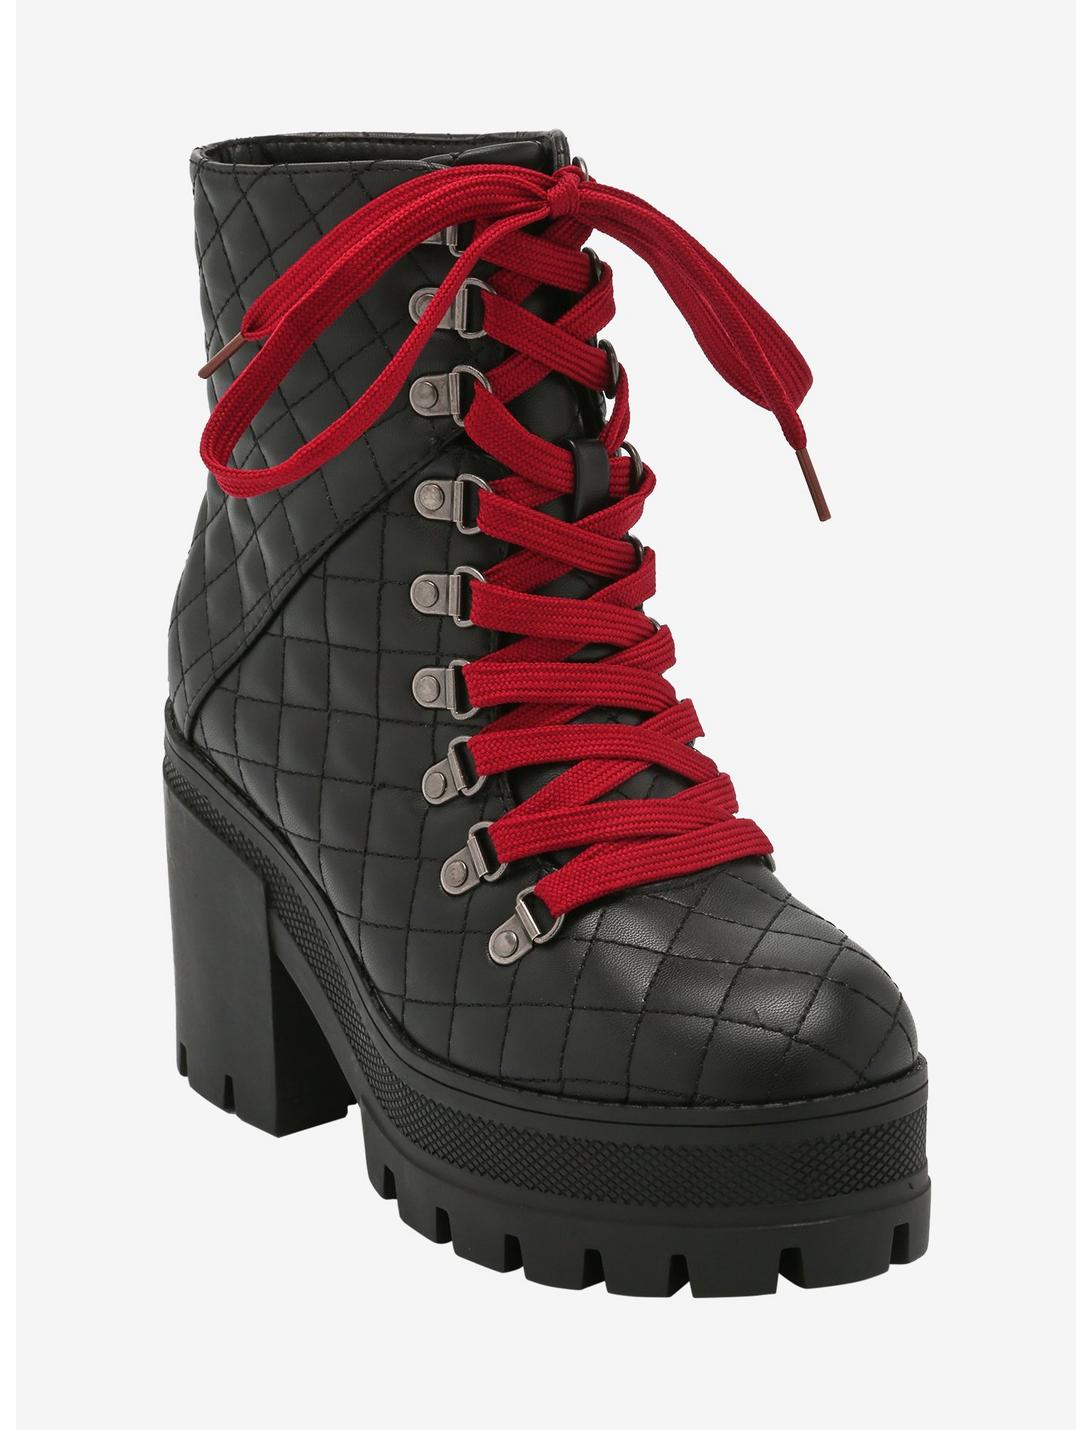 Red Lace Quilted Platform Combat Boots, MULTI, hi-res